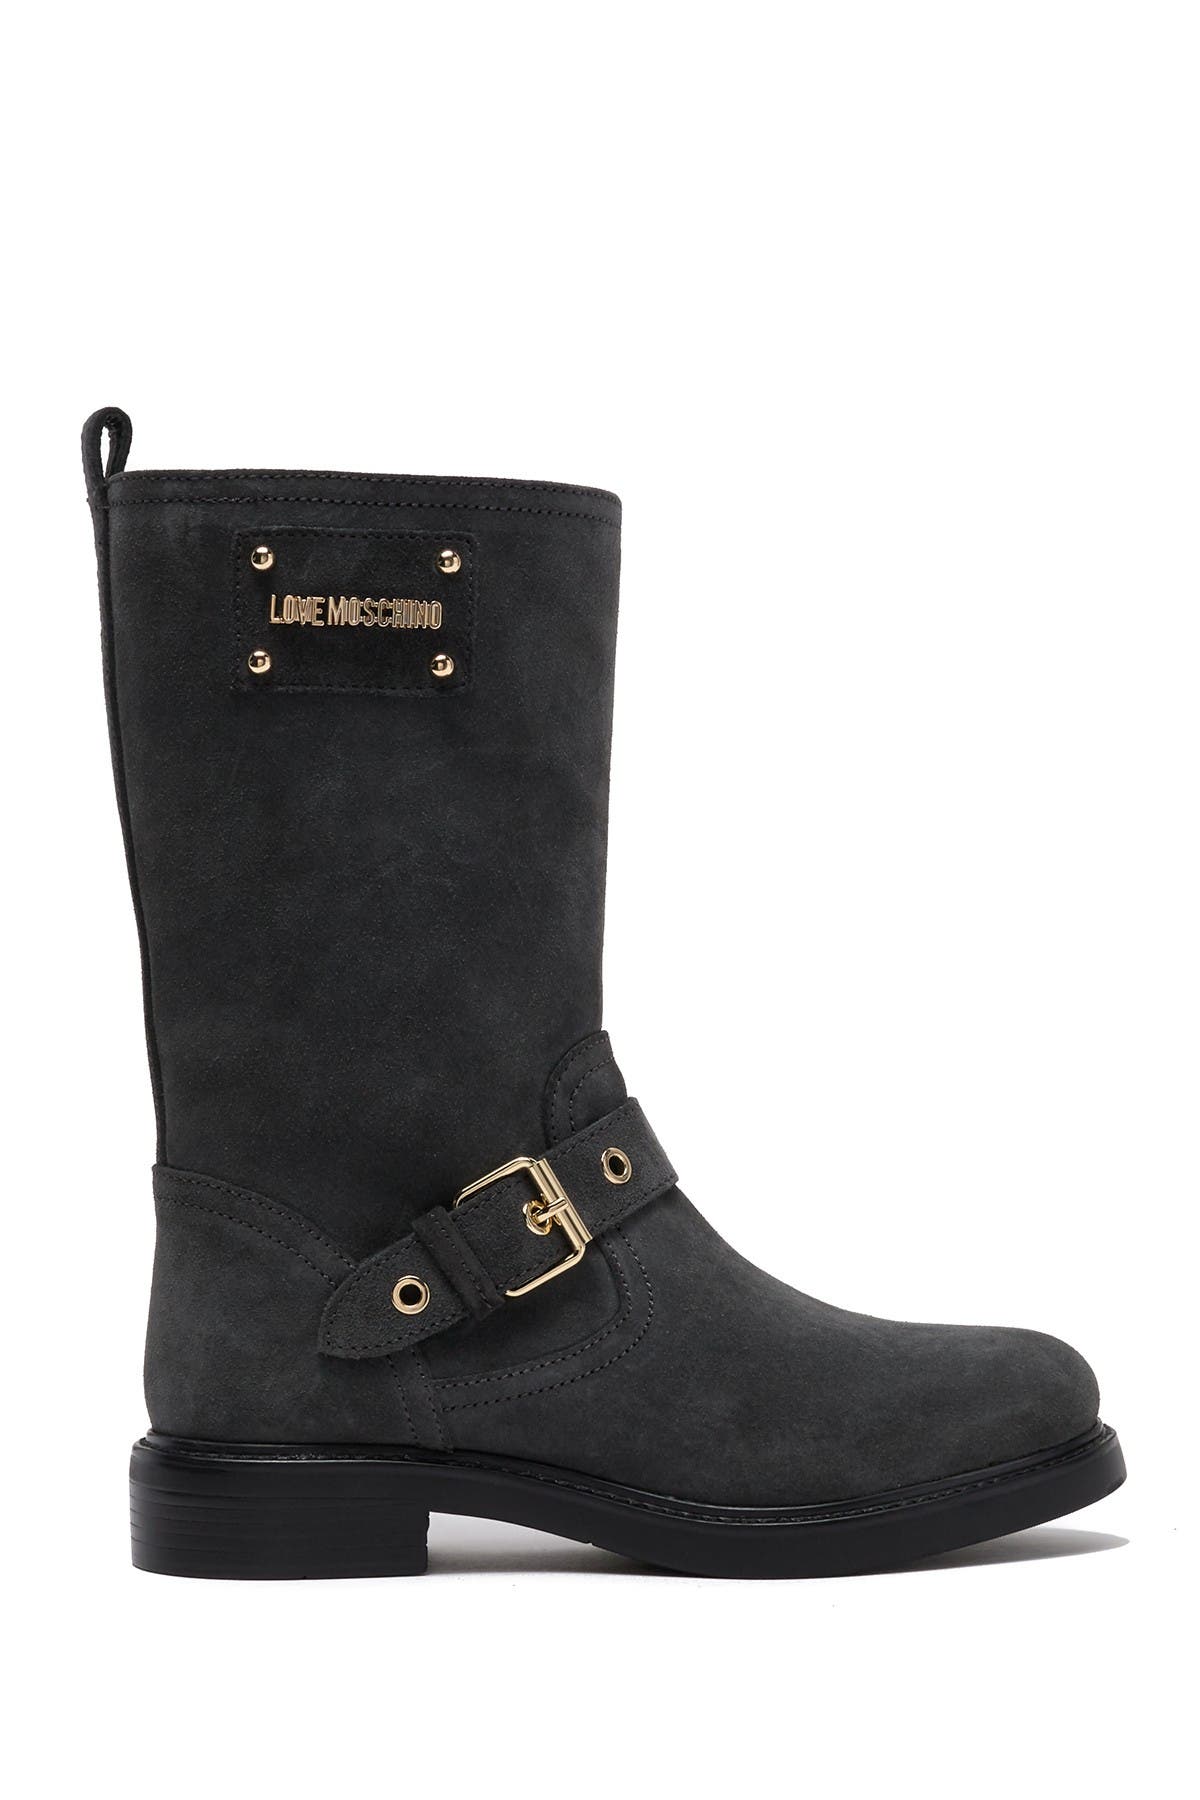 moschino leather boots